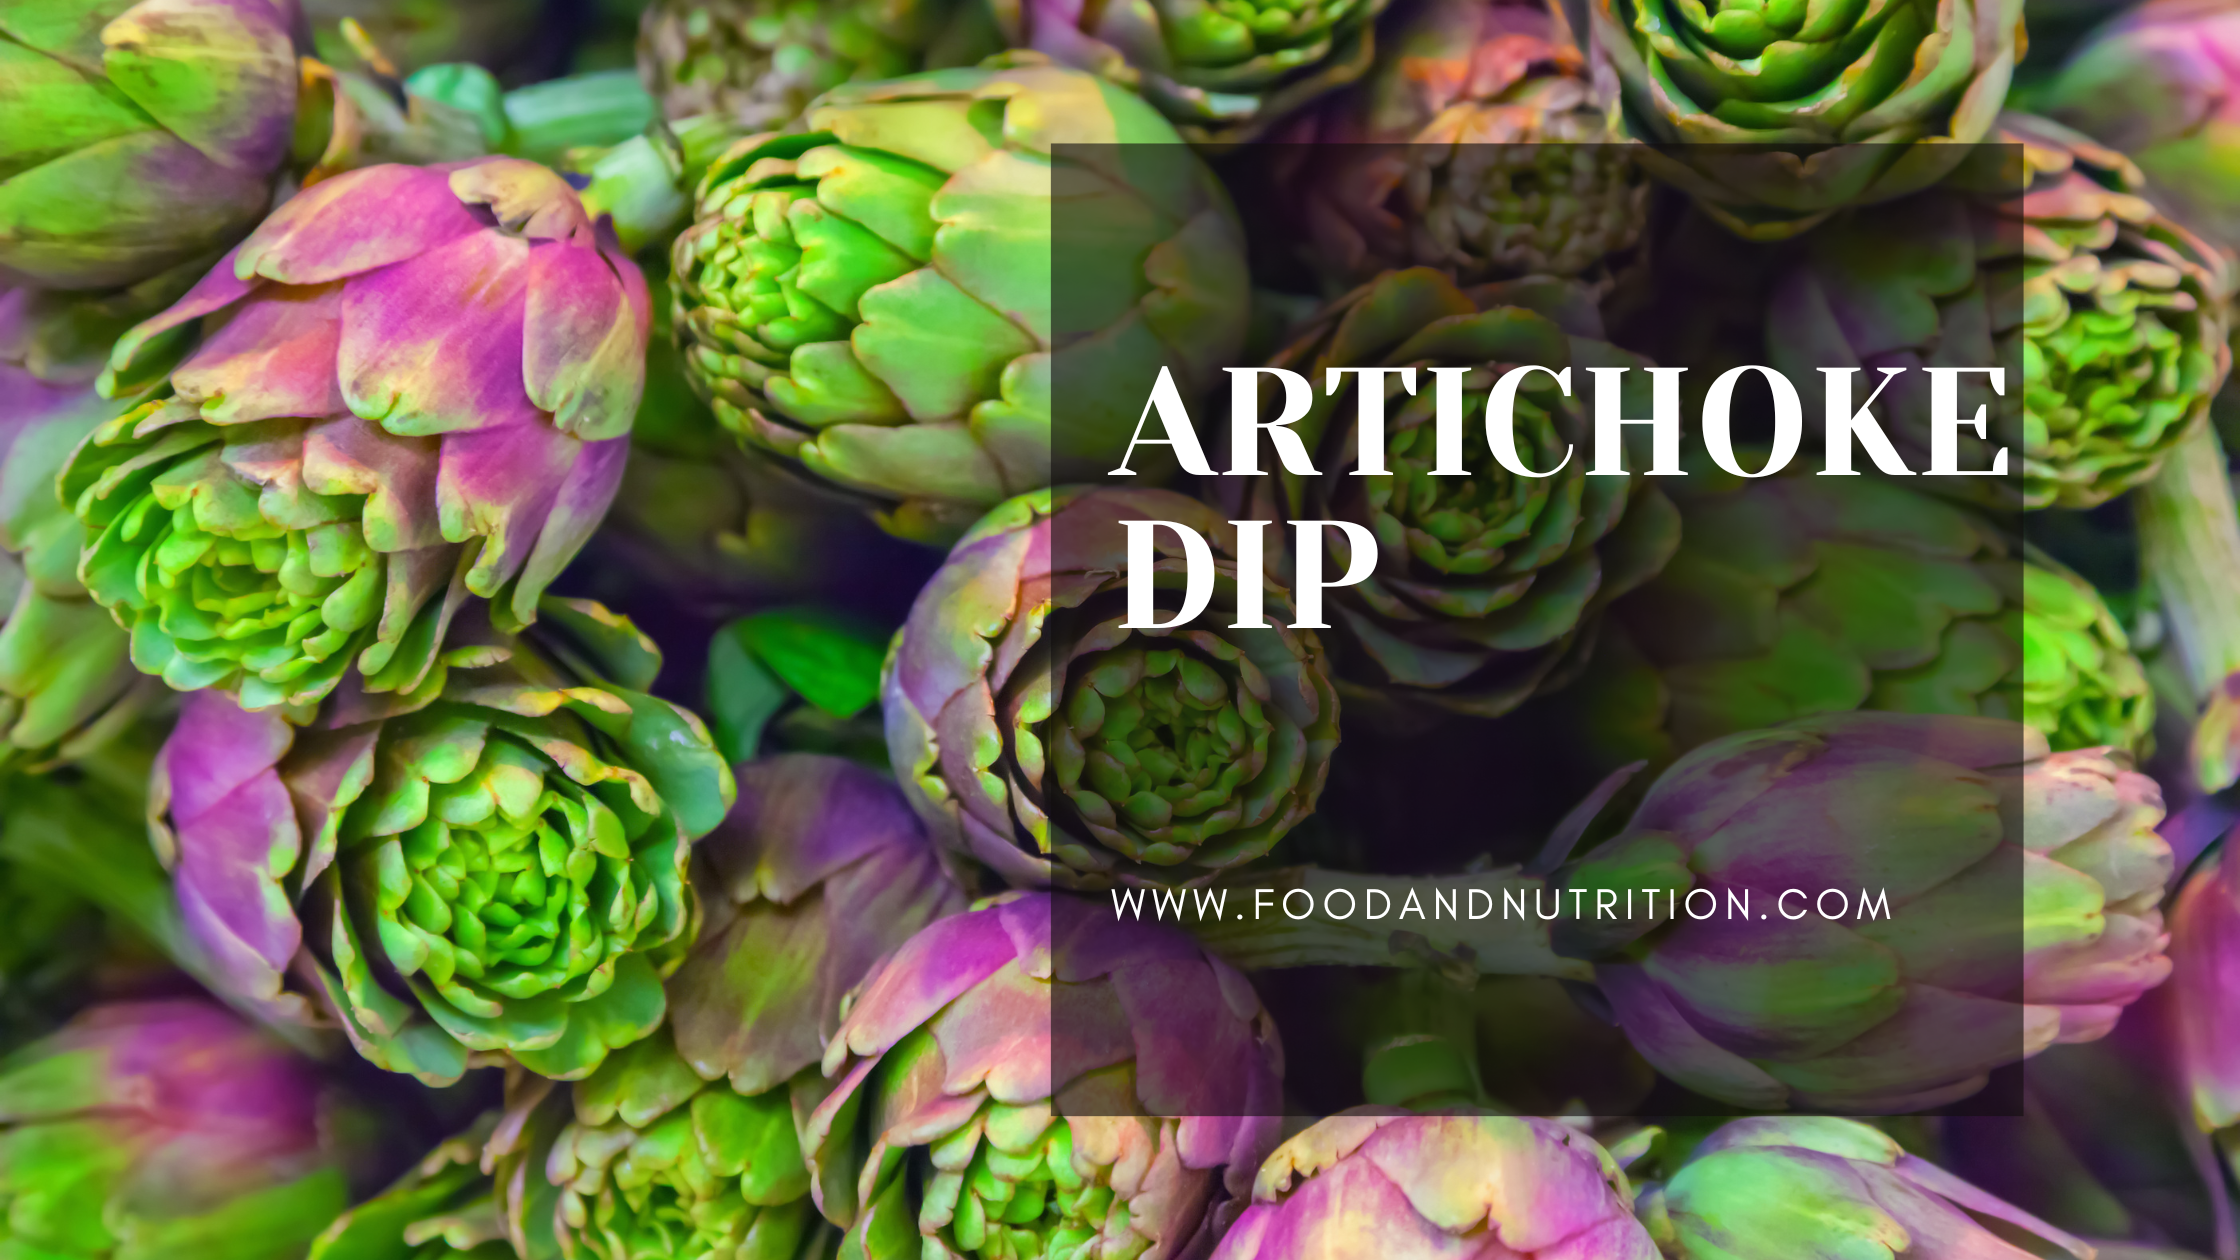 Irresistible Artichoke Dip: A Delicious Blend of Taste and Nutrition